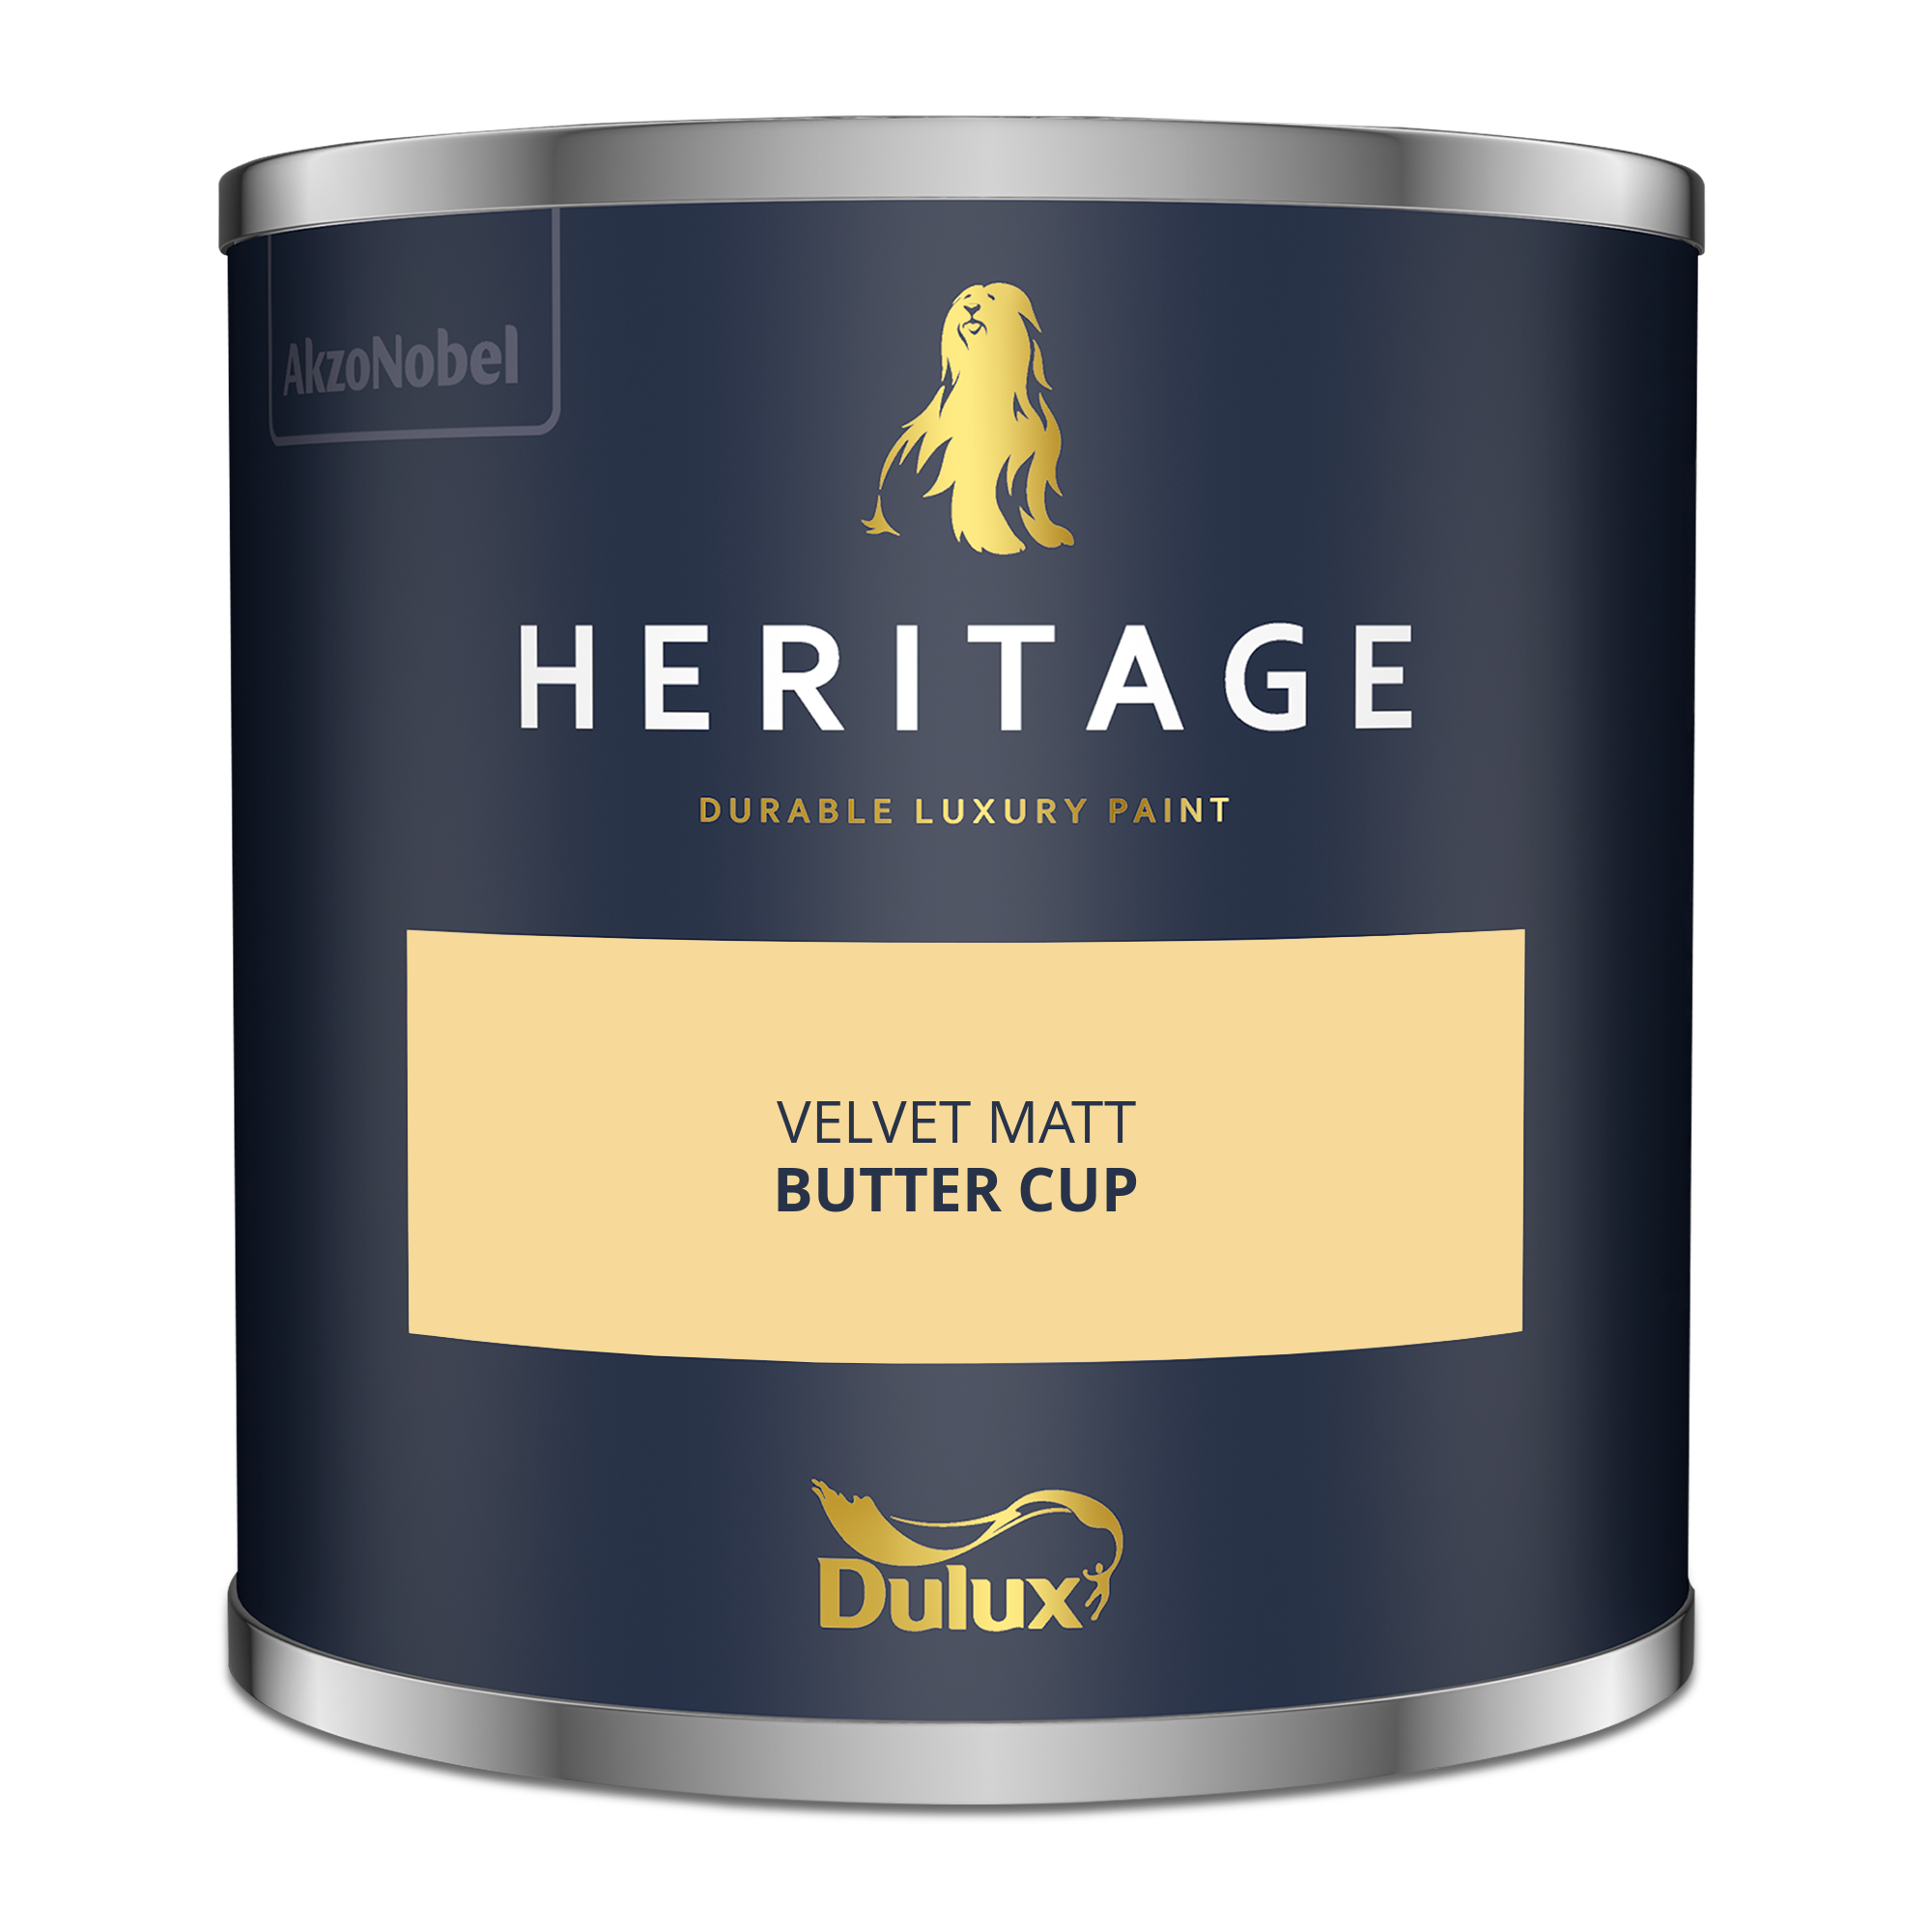 Dulux Heritage Tester Butter Cup 125ml